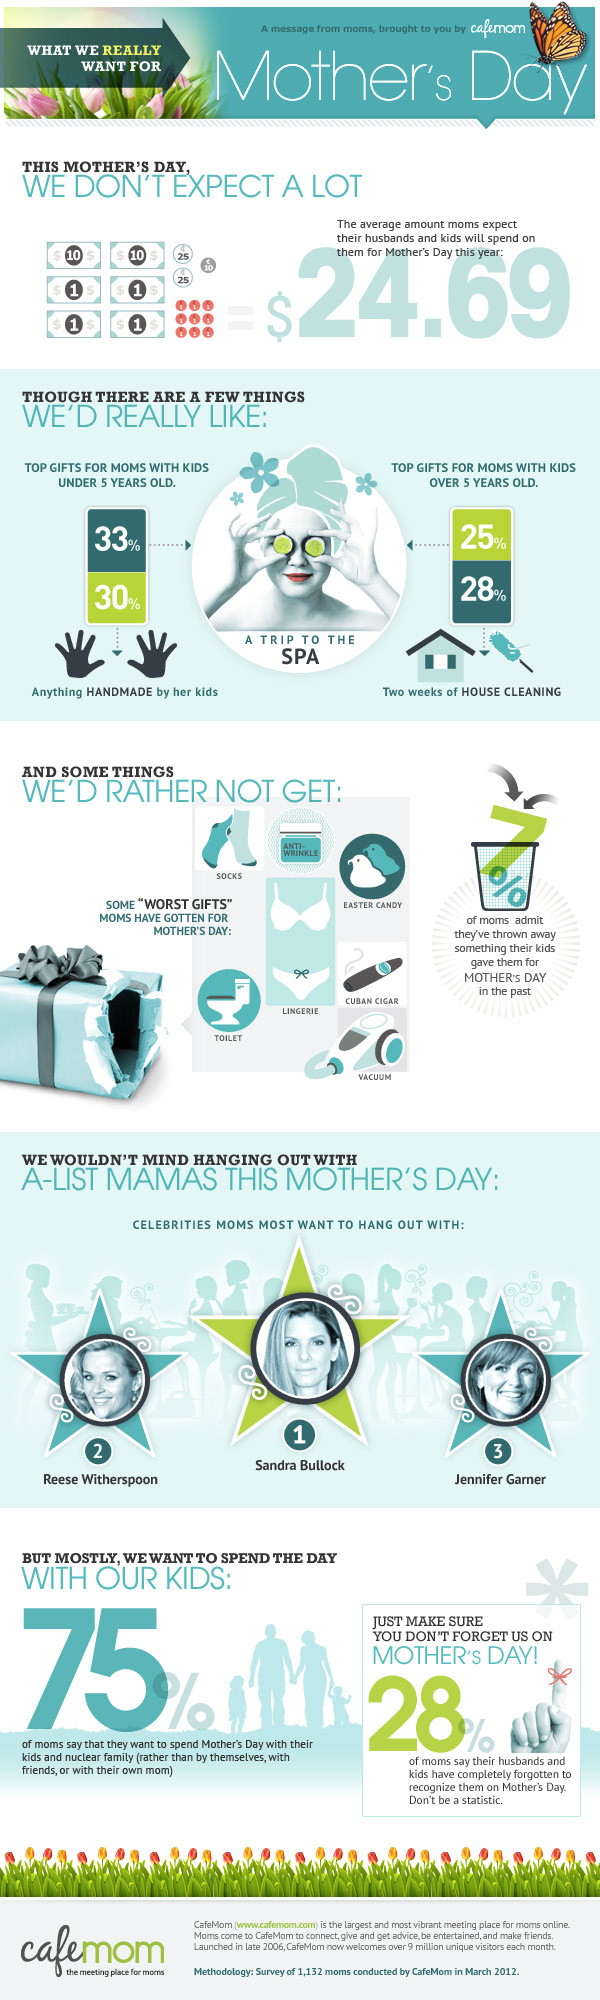 Mothers Day Trends